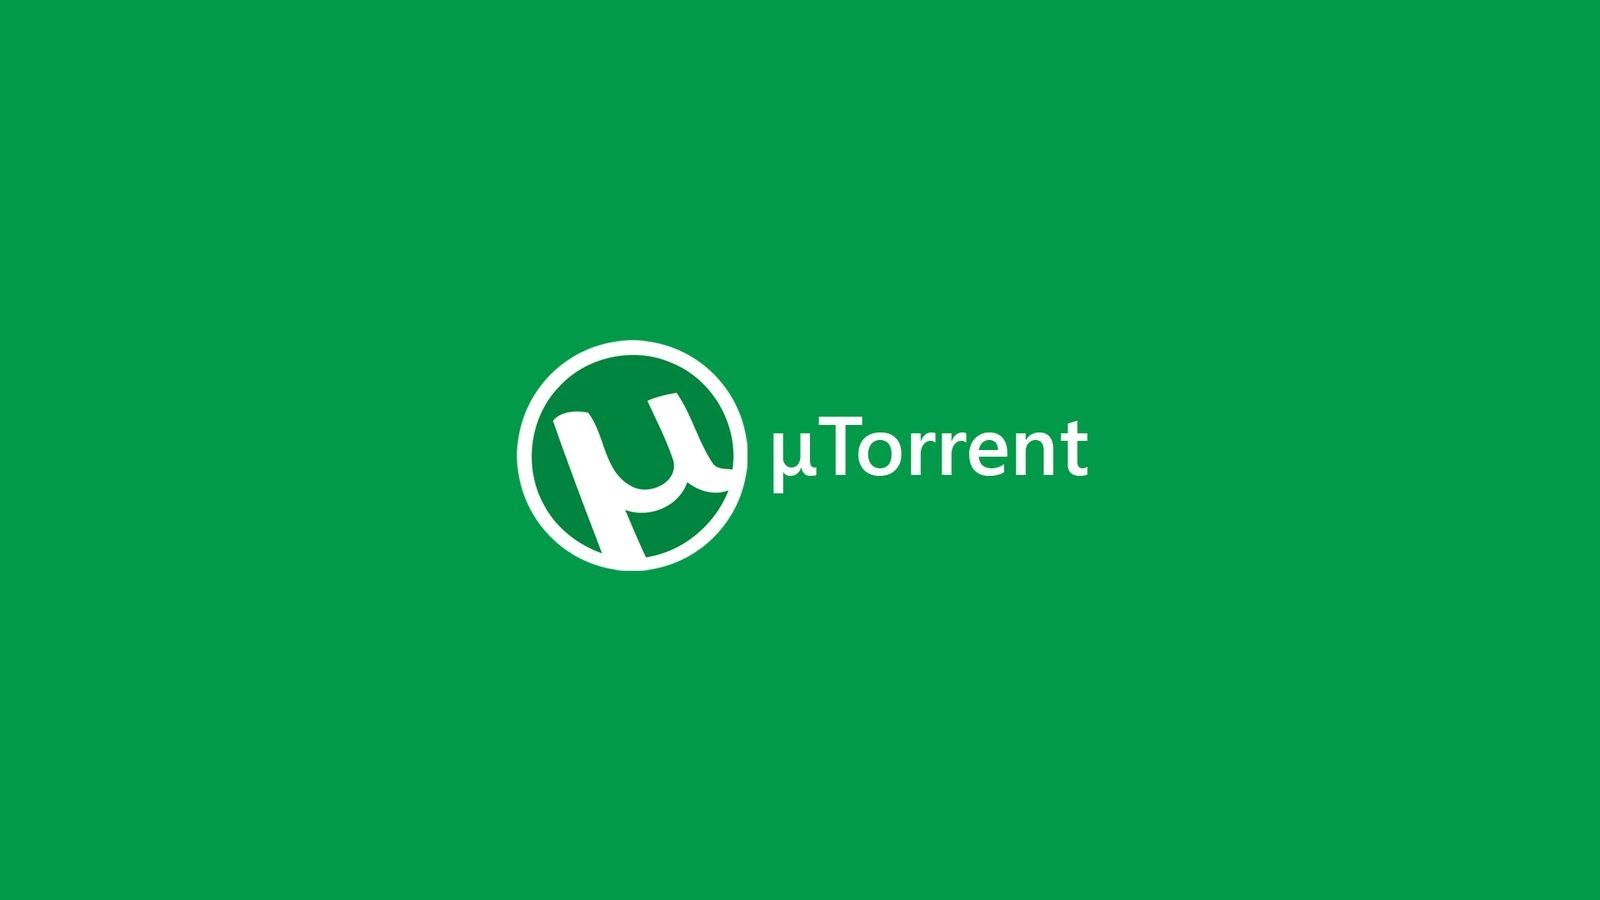 uTorrent Now Has Its Own Game Store Built Right into the Torrent Client